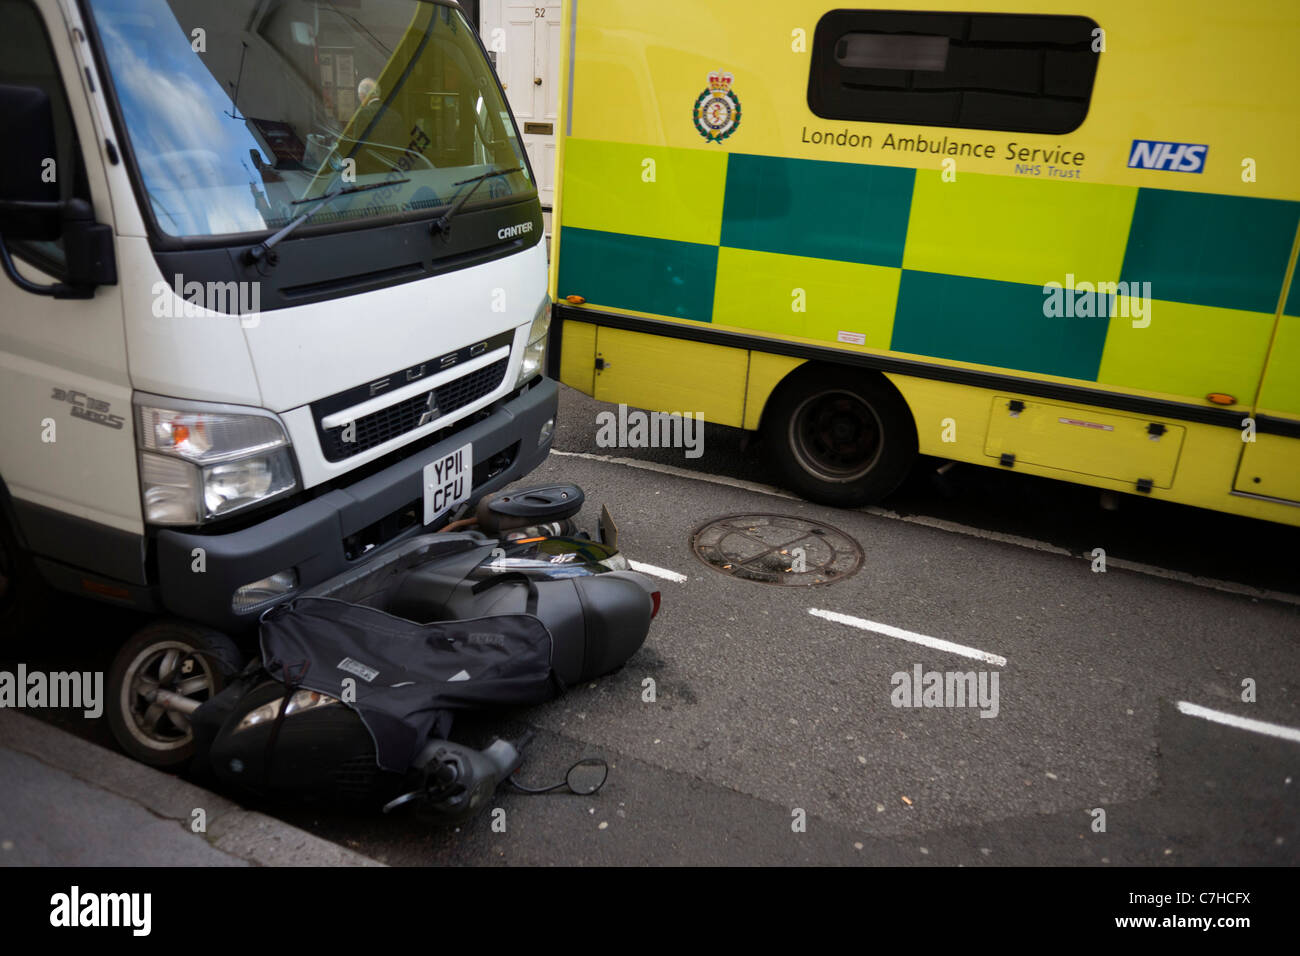 A crushed scooter and a passing NHS ambulance in London's West End. Stock Photo